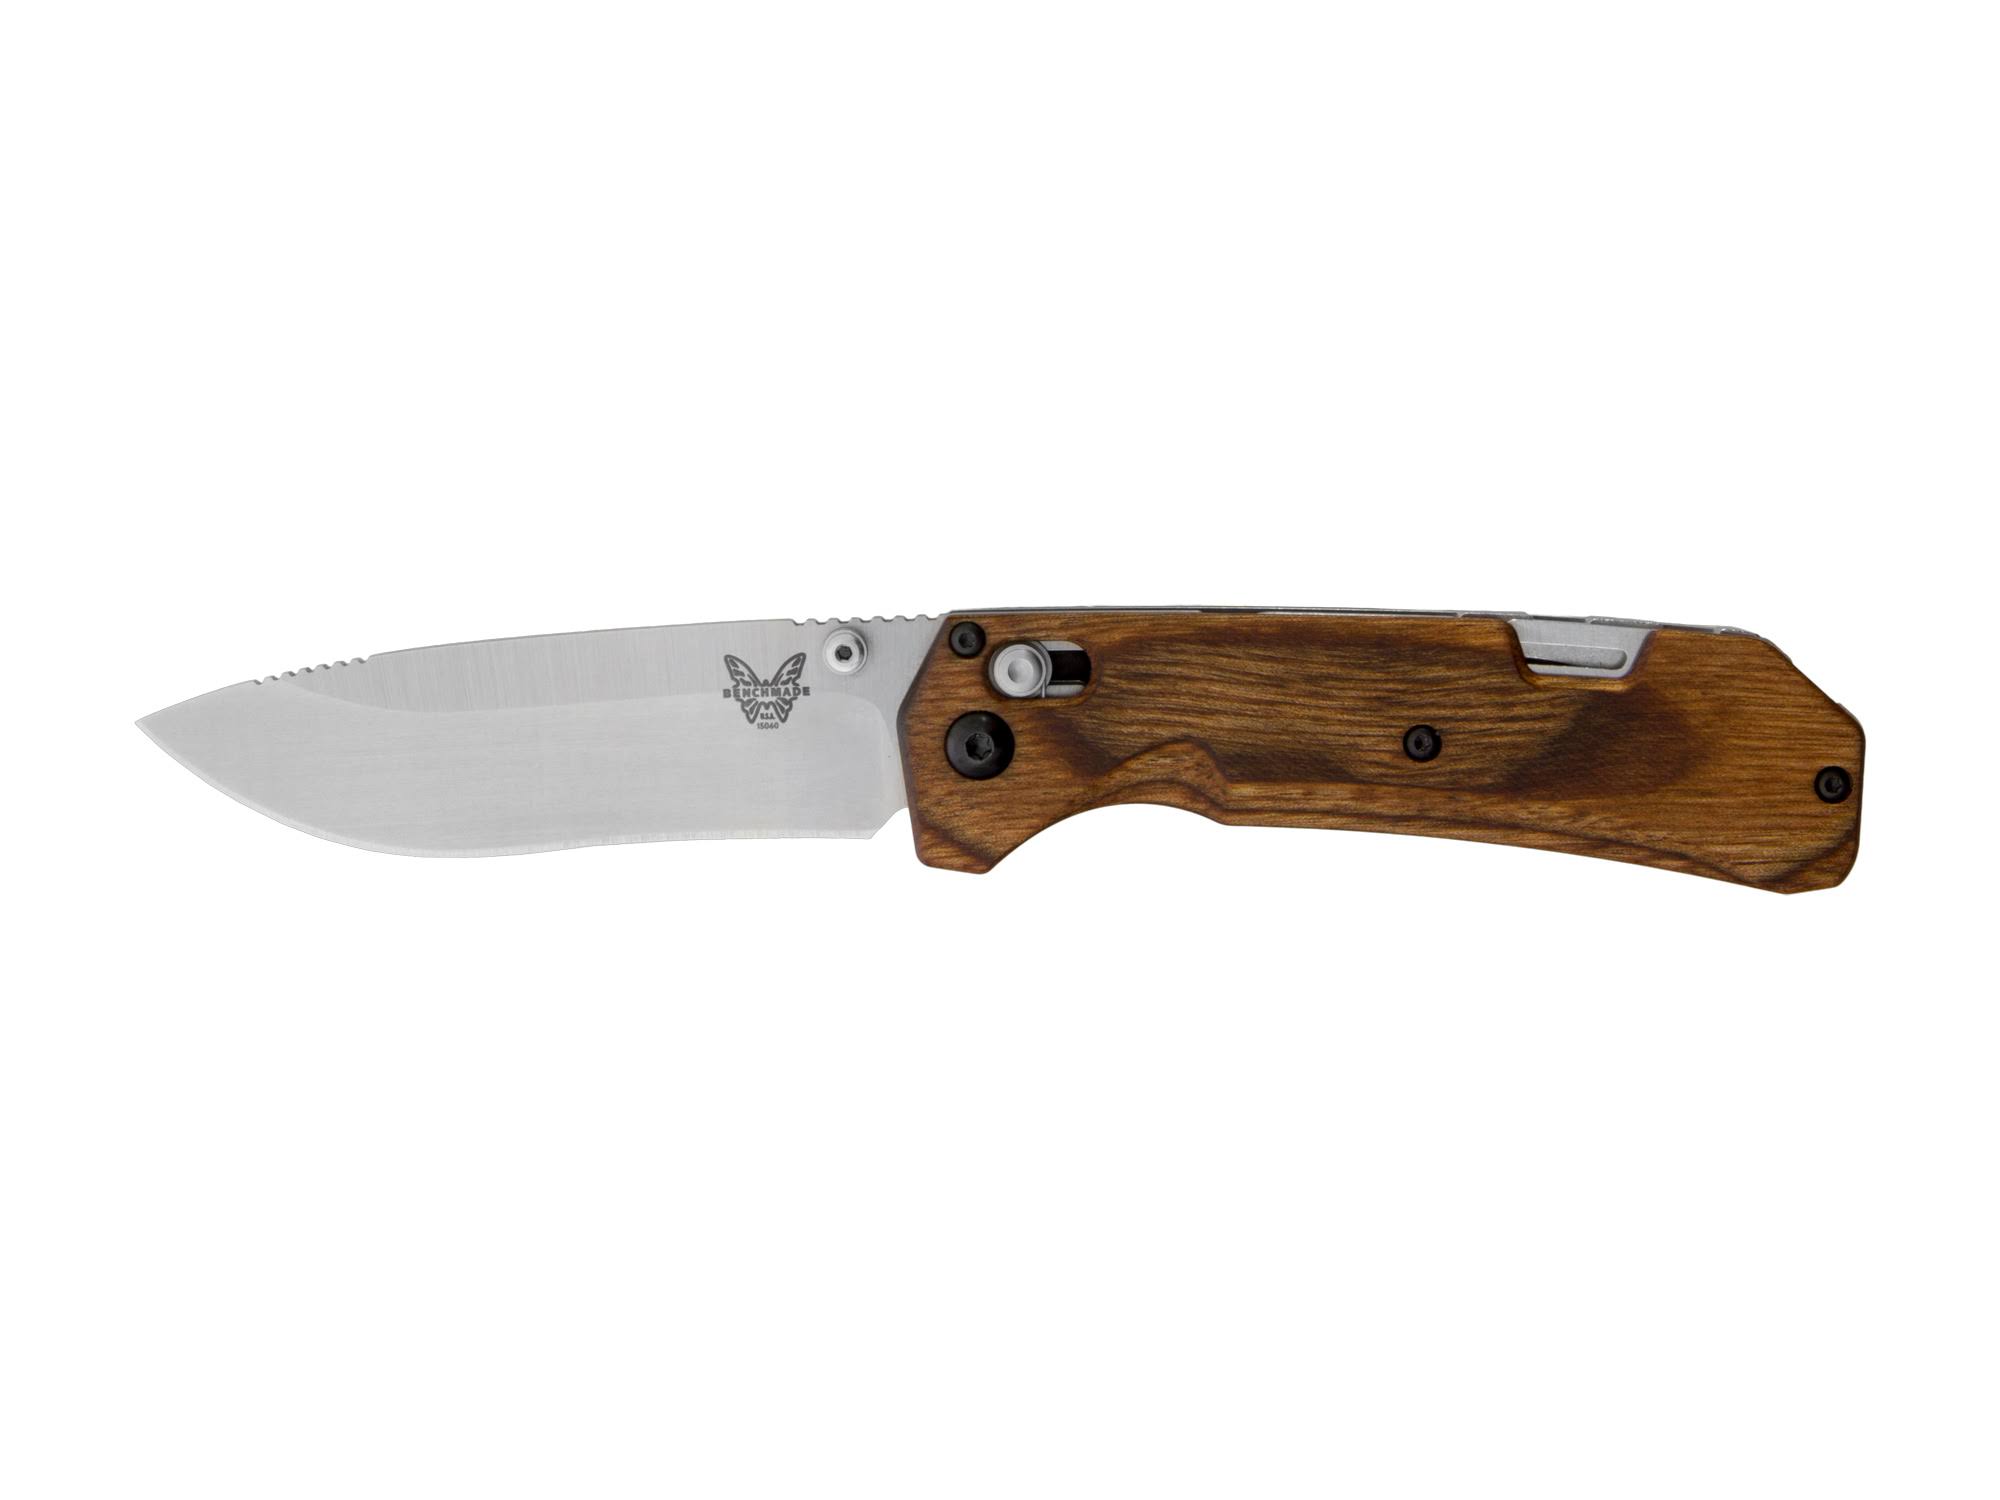 Benchmade Grizzly Creek Plain Edge S30v Folding Knife - with Hook Drop-Point, Wood Handle